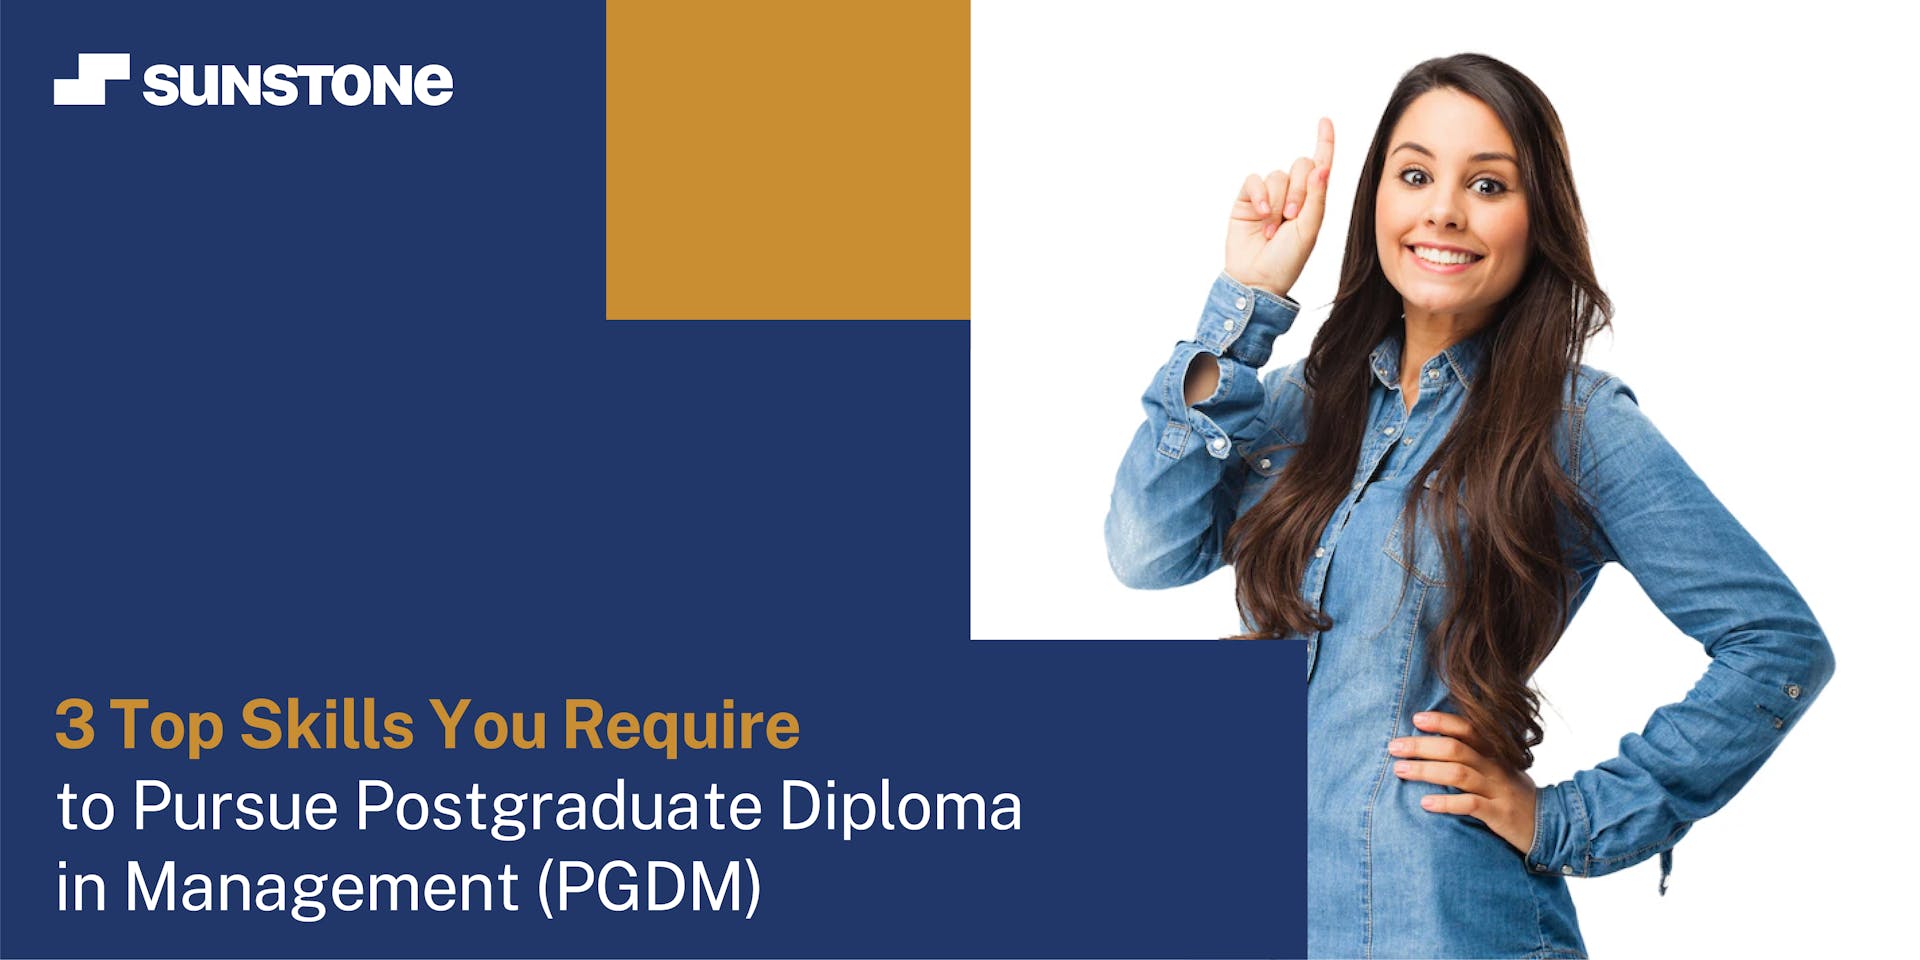 3 top skills you require to pursue Postgraduate Diploma in Management (PGDM)